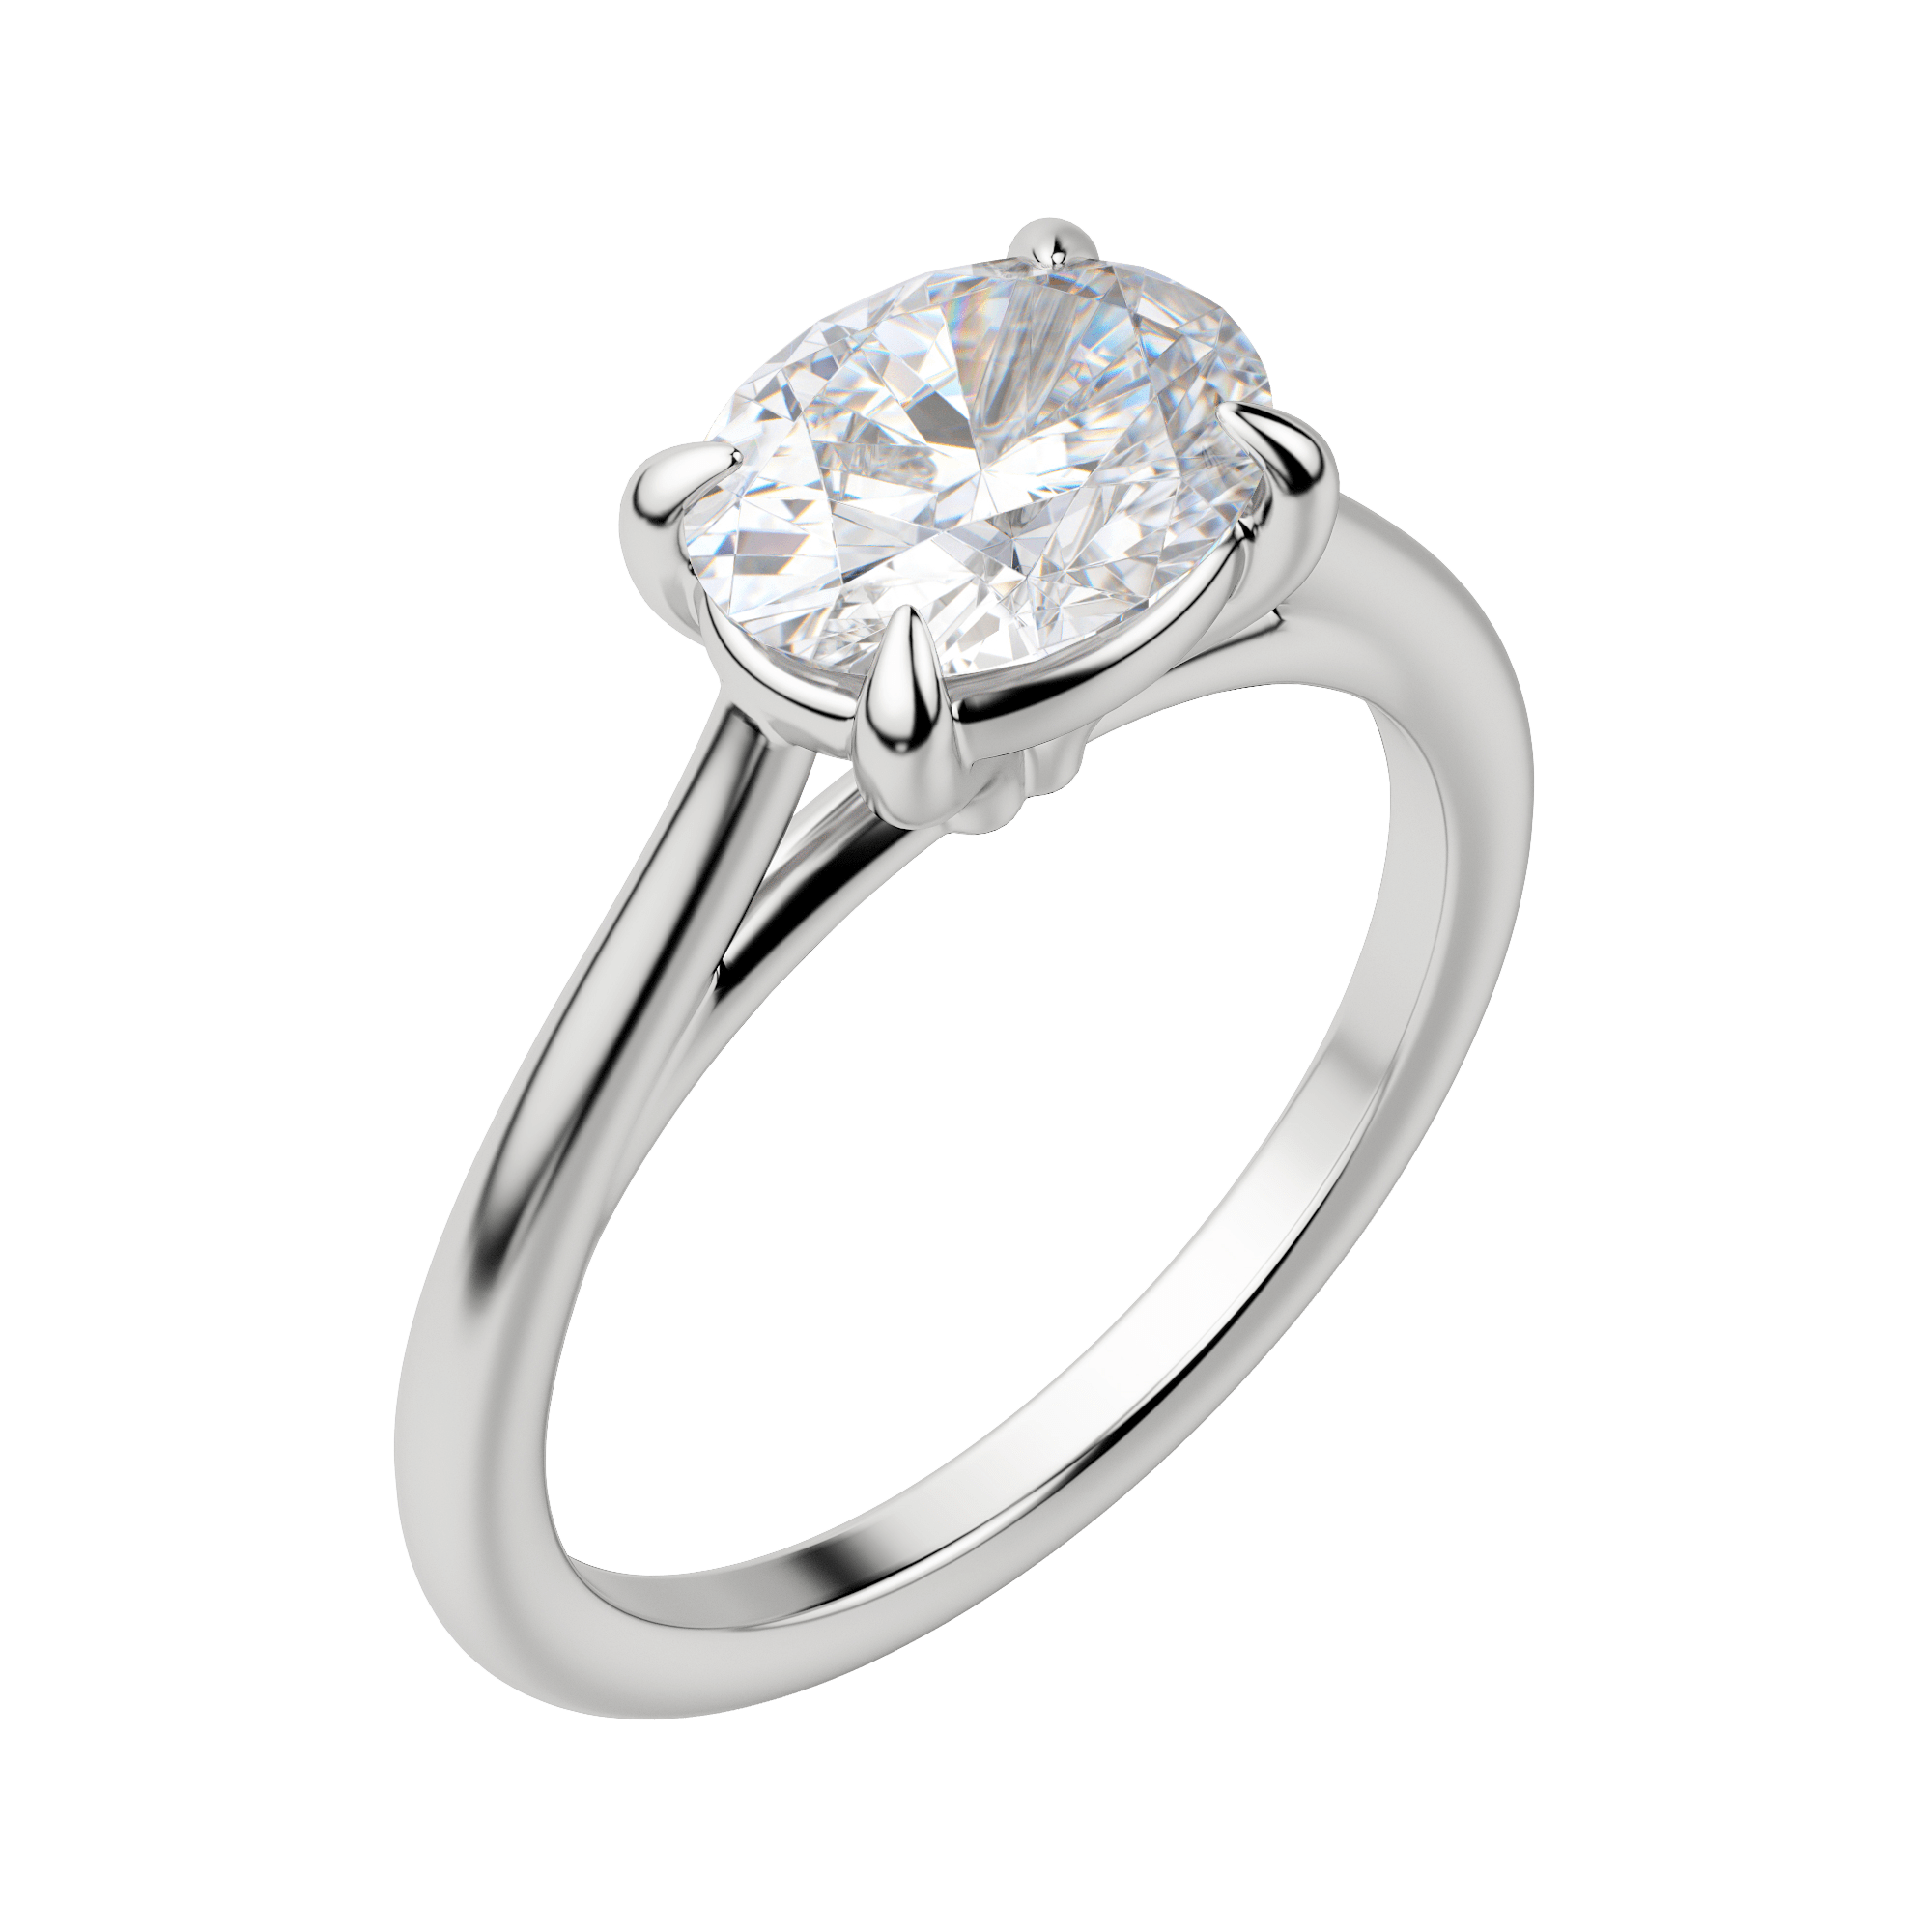 Edgy Classic Oval Cut Engagement Ring, Default, 18K White Gold, Platinum,\r
